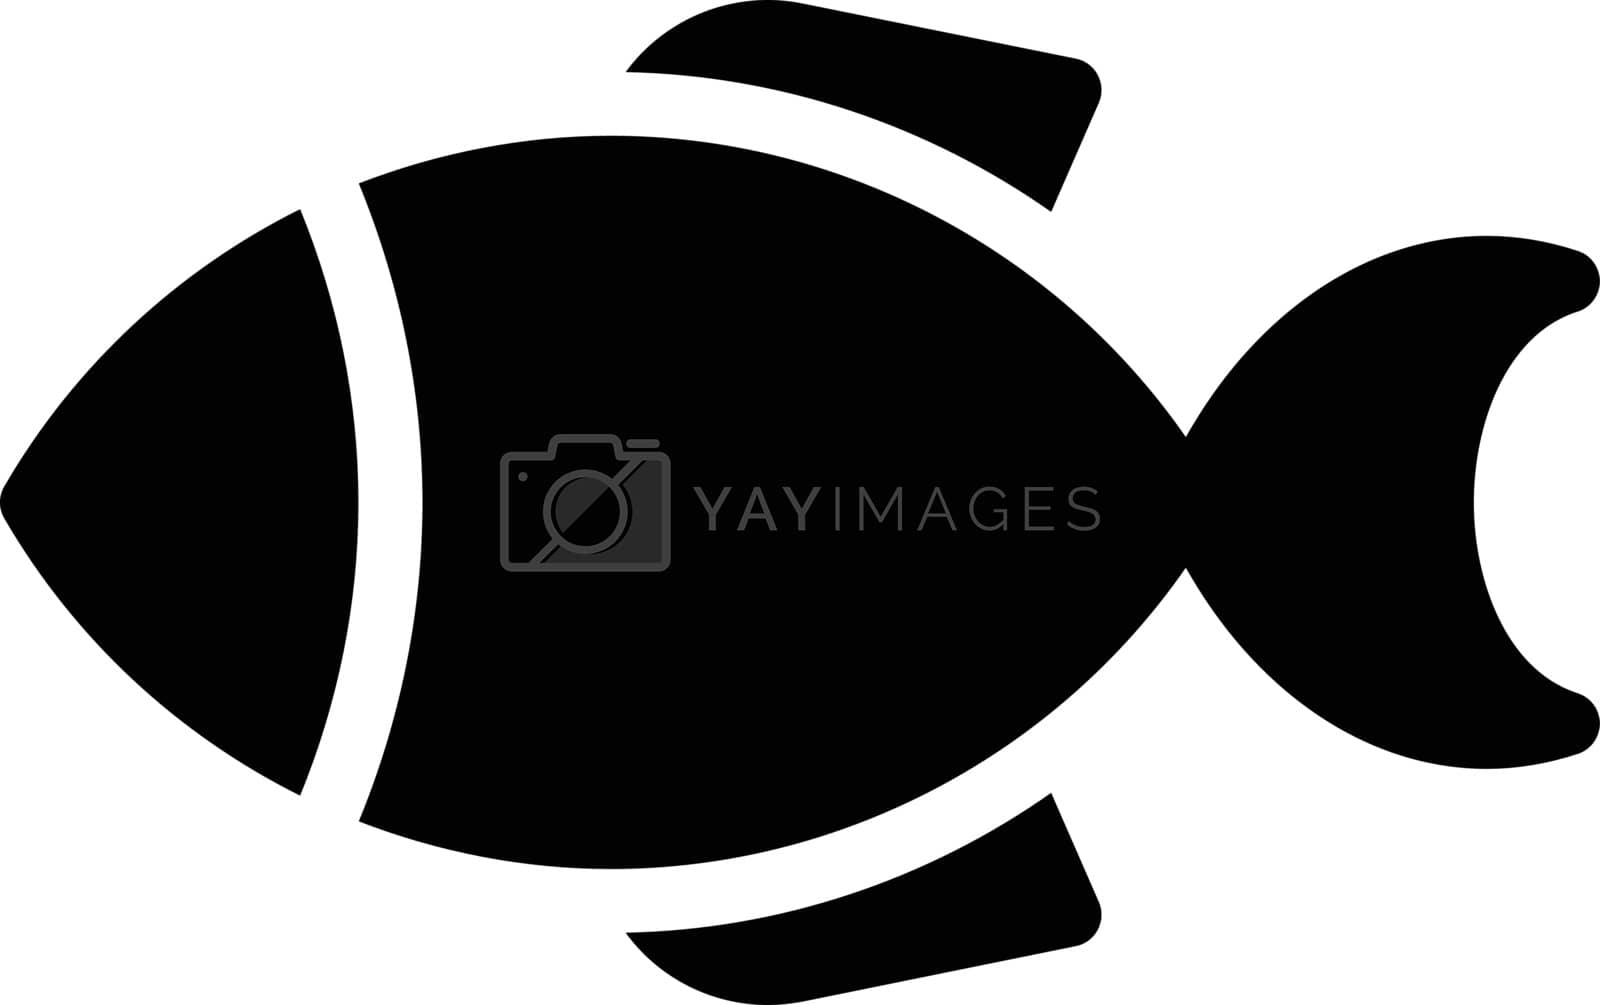 Royalty free image of seafood by vectorstall